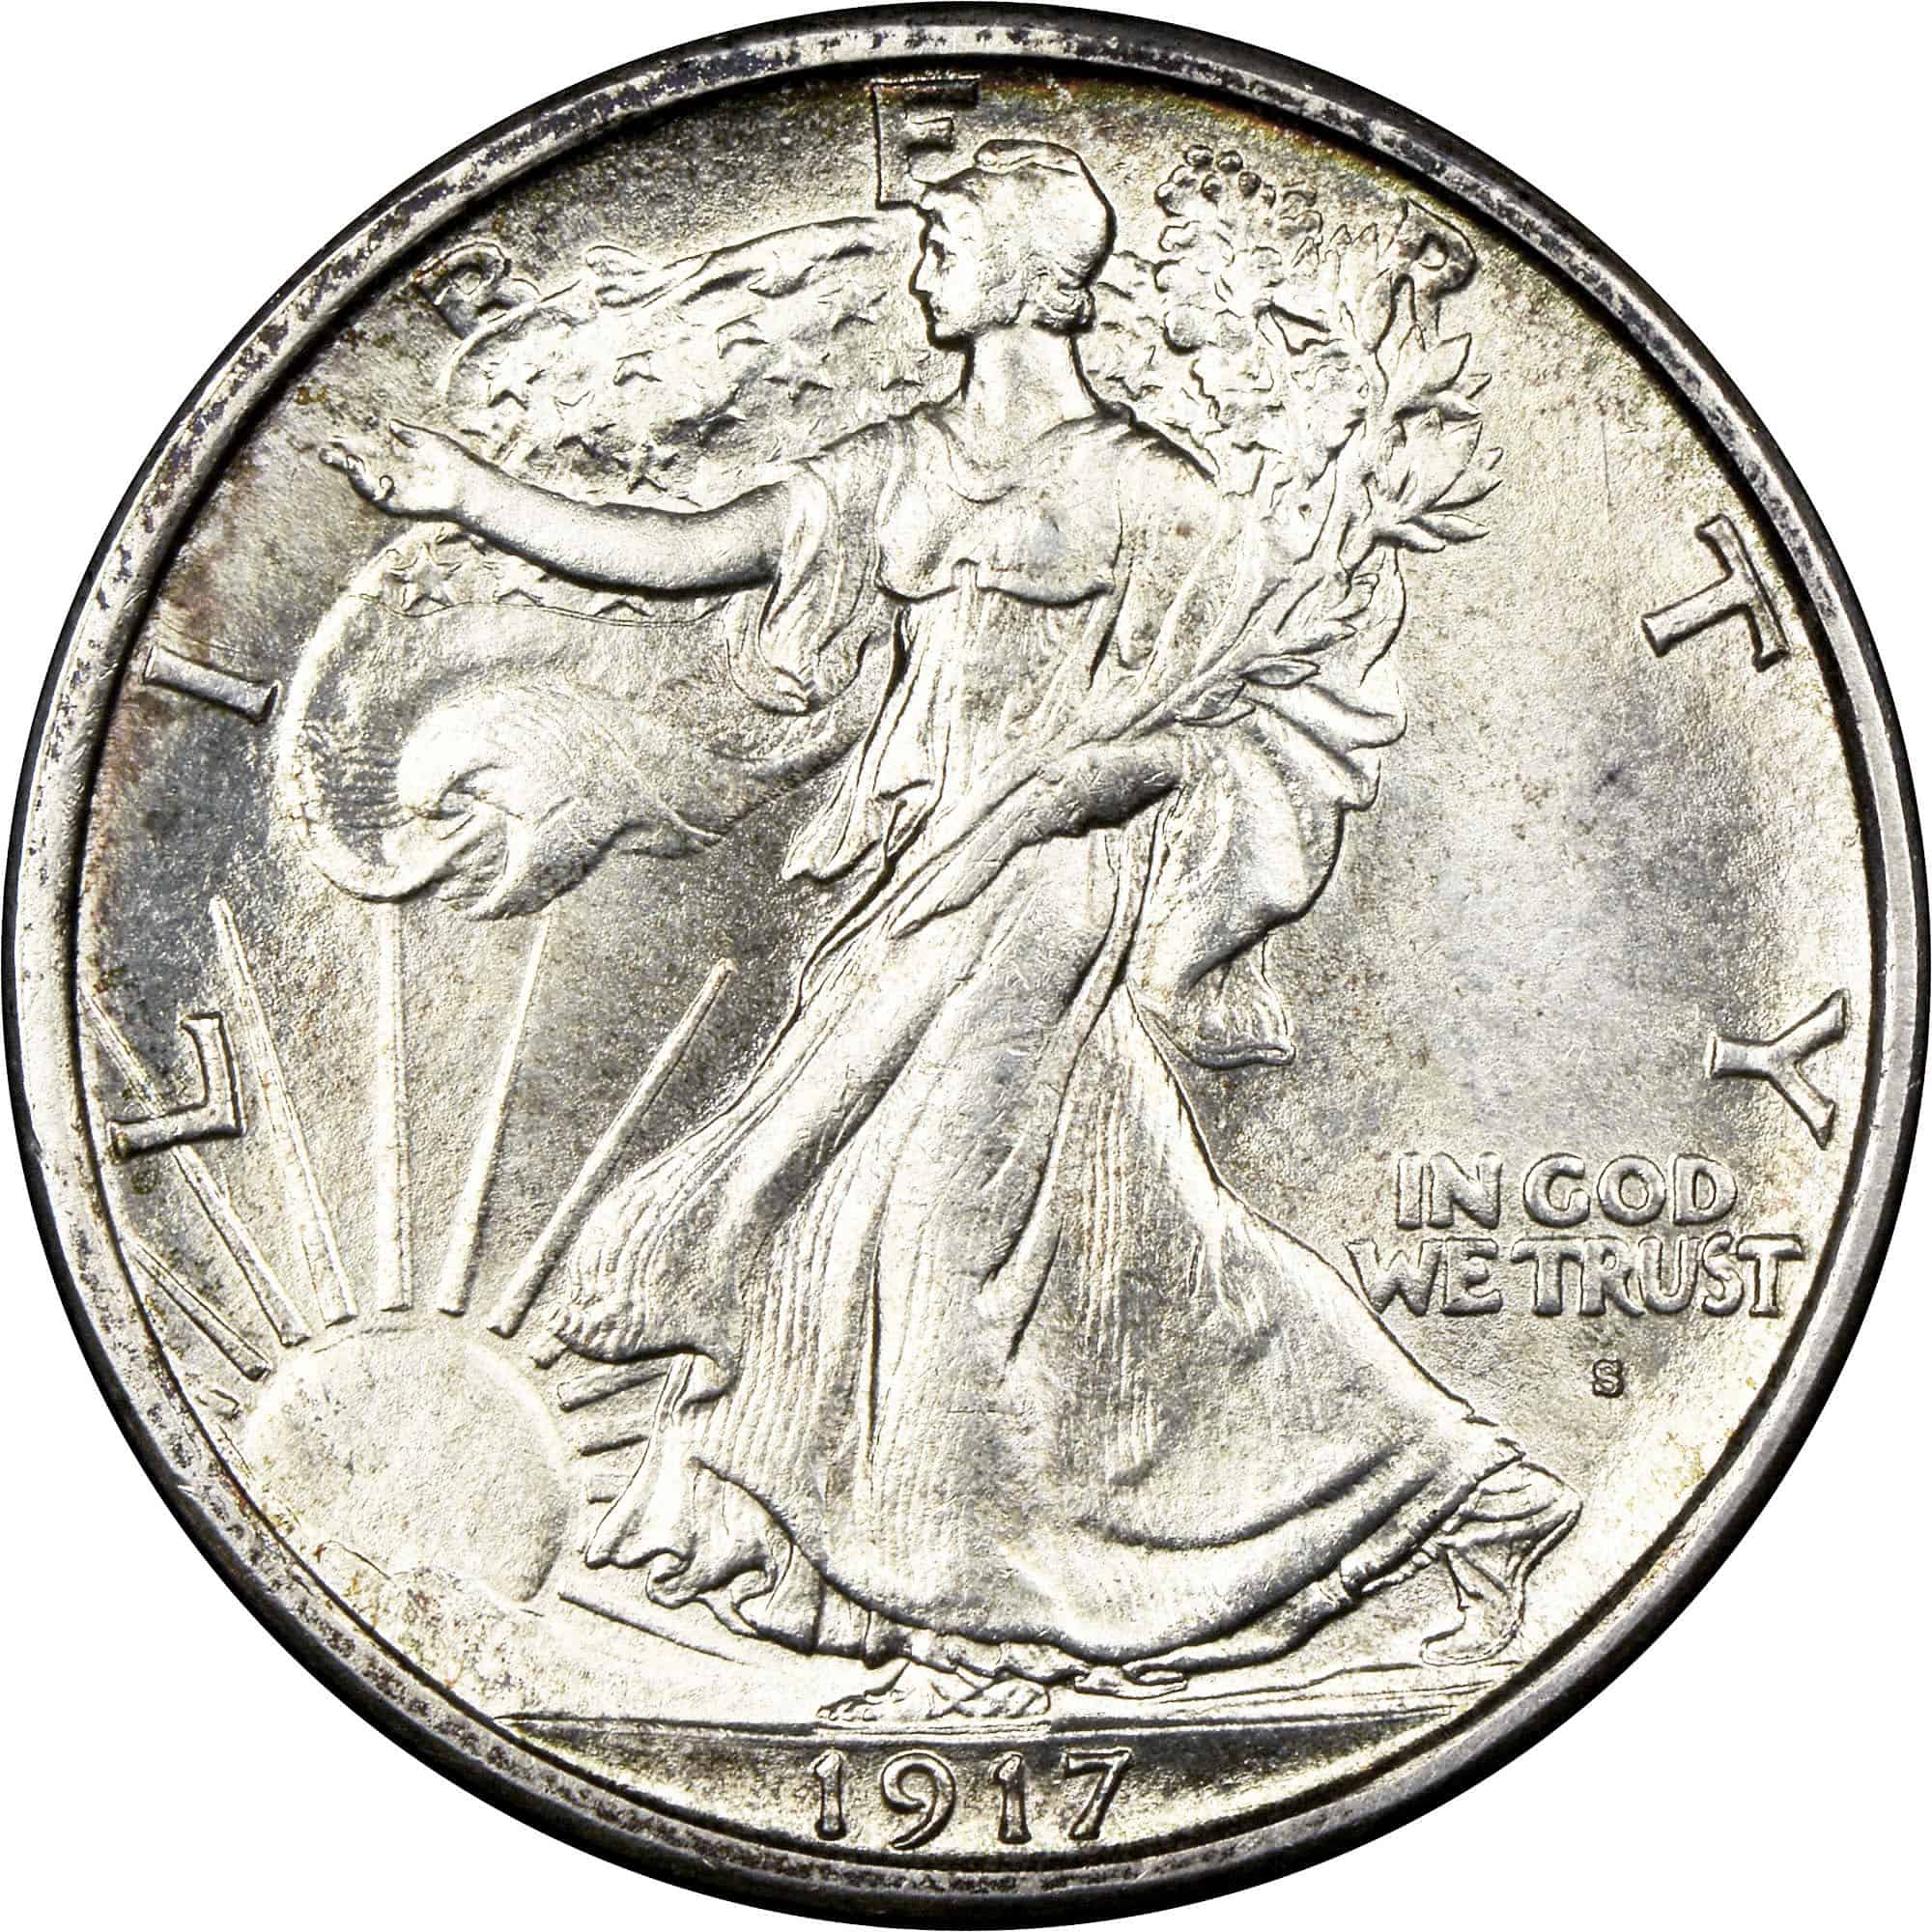 The obverse of the 1917 Walking Liberty half-dollar